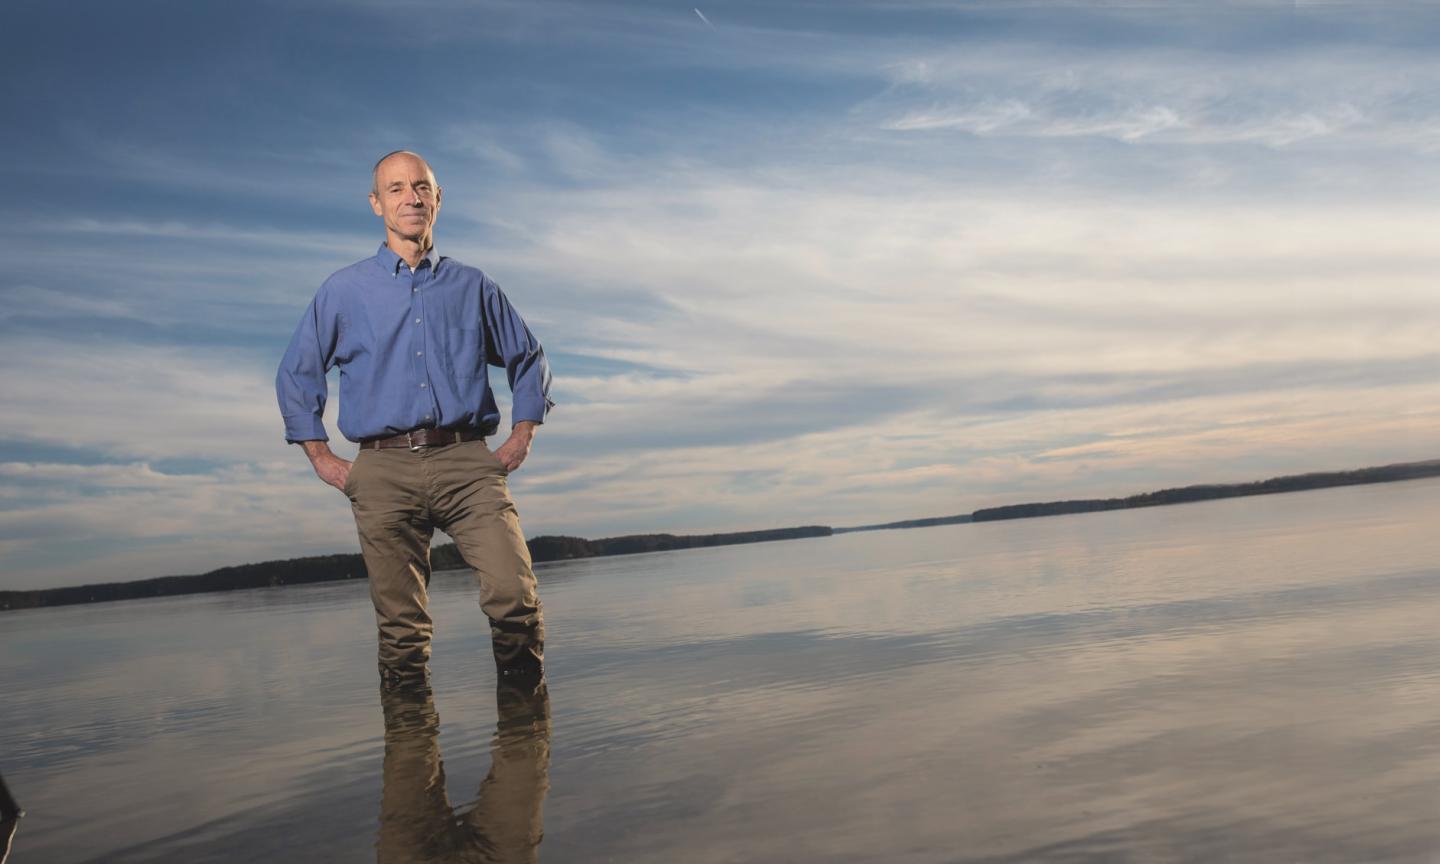 Nicholas Distinguished Professor of Earth Science Drew Shindell is a leader in the study of global climate change and its relationship to human society. That makes him a key player in Duke’s Climate Commitment.